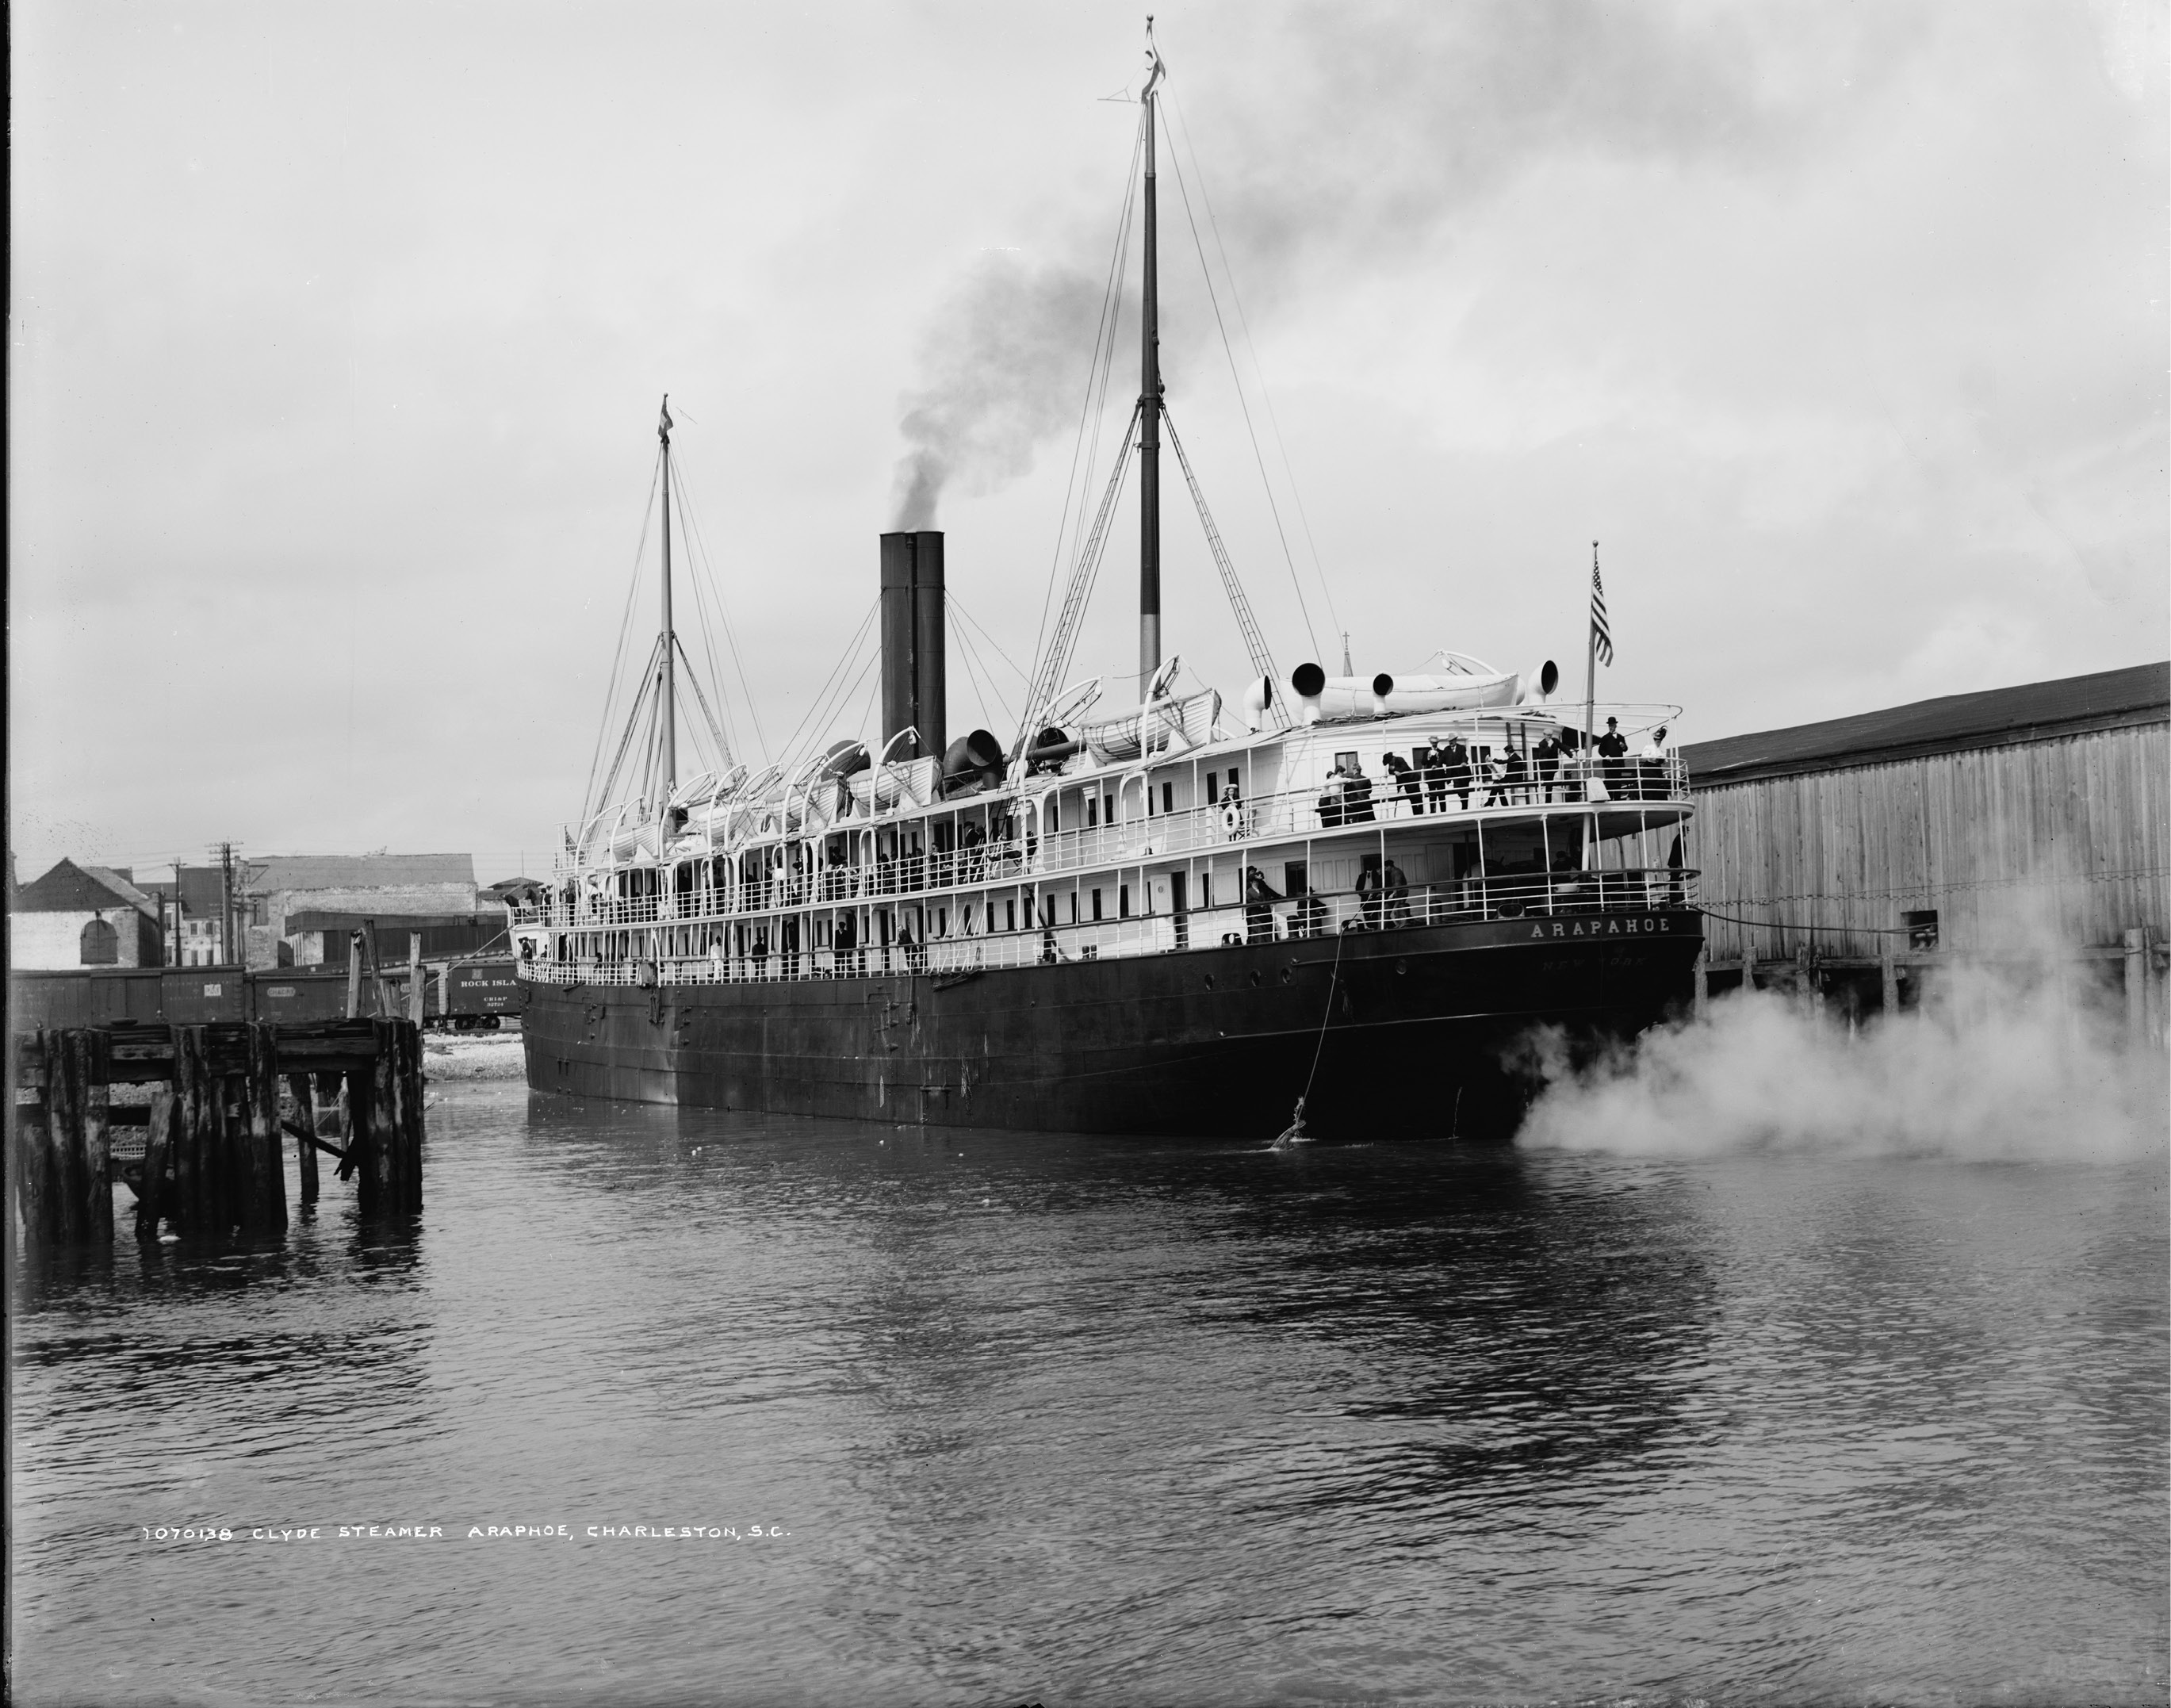 The Clyde ships ran regularly between Charleston, Philadelphia, and New York, docking at the wharves at the foot of Queen Street. The amenities they touted included cabins finished in oak; an exceptionally attractive social hall ”finished in cream and gold, having an upright piano, velvet cushioned sofas;” and the most modern invention of all—electric lights throughout. Clyde Steamer Arapahoe, circa 1900, from Detroit Publishing Co.